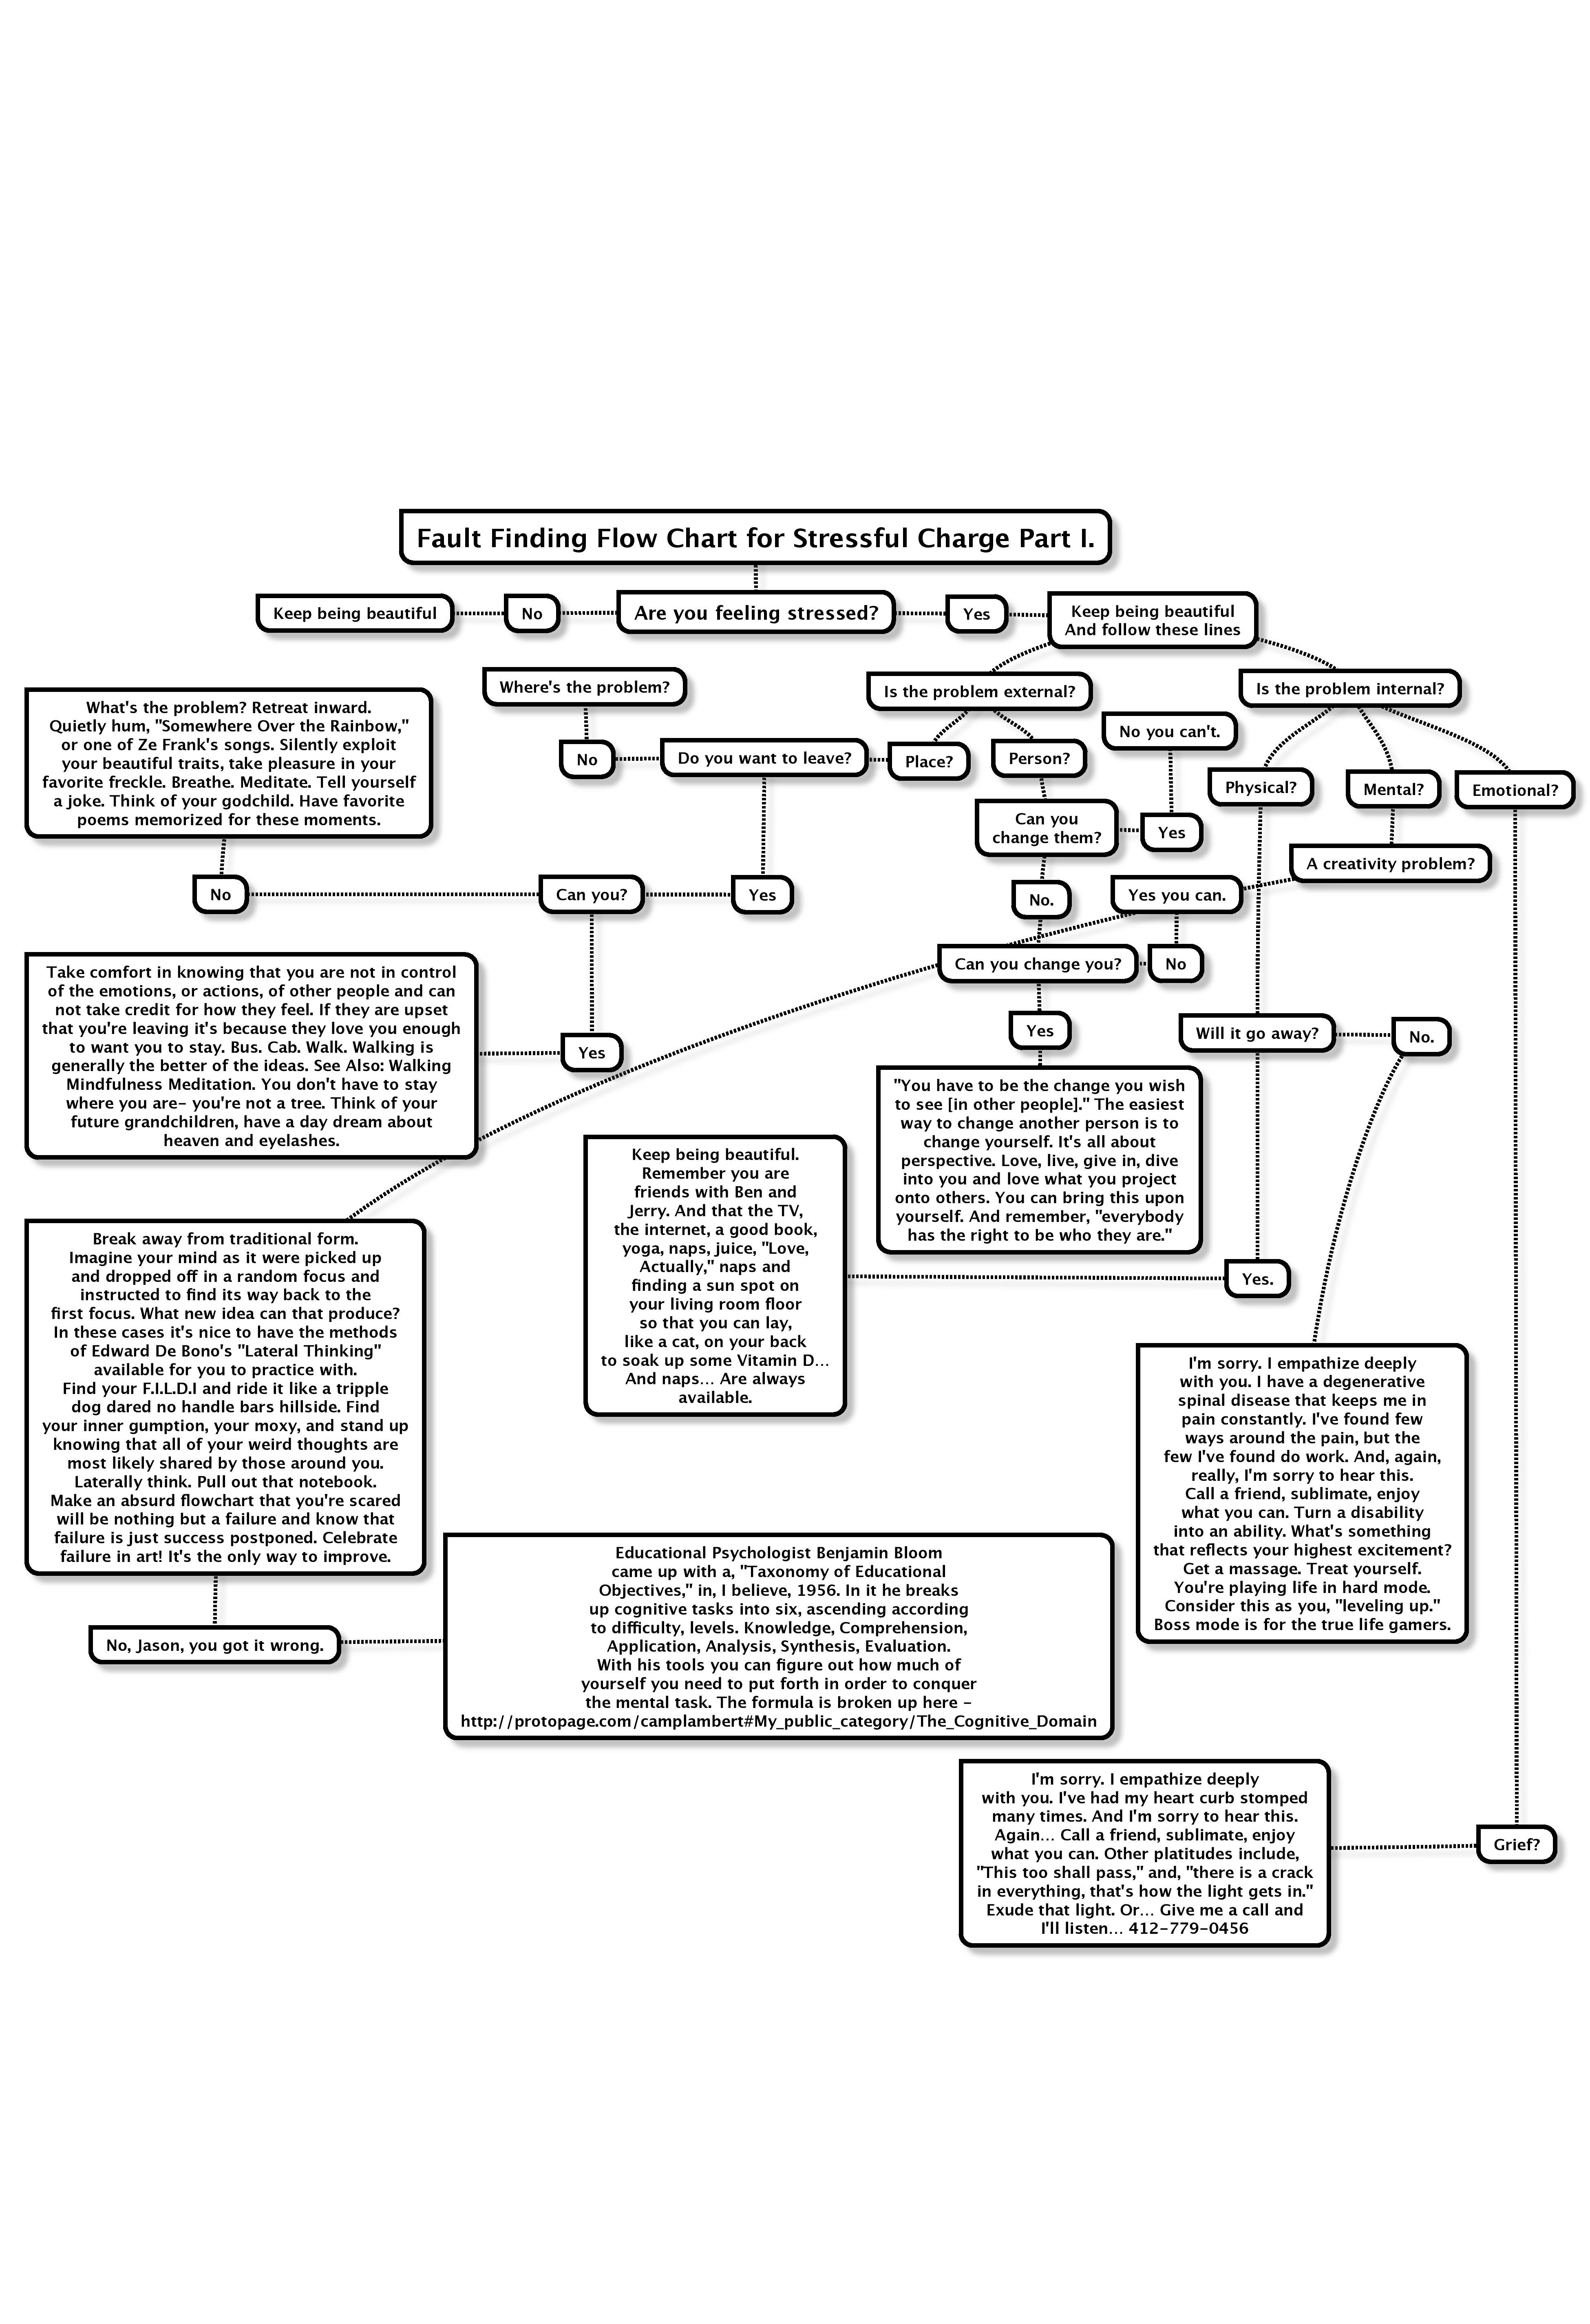 Fault Finding Flow Chart